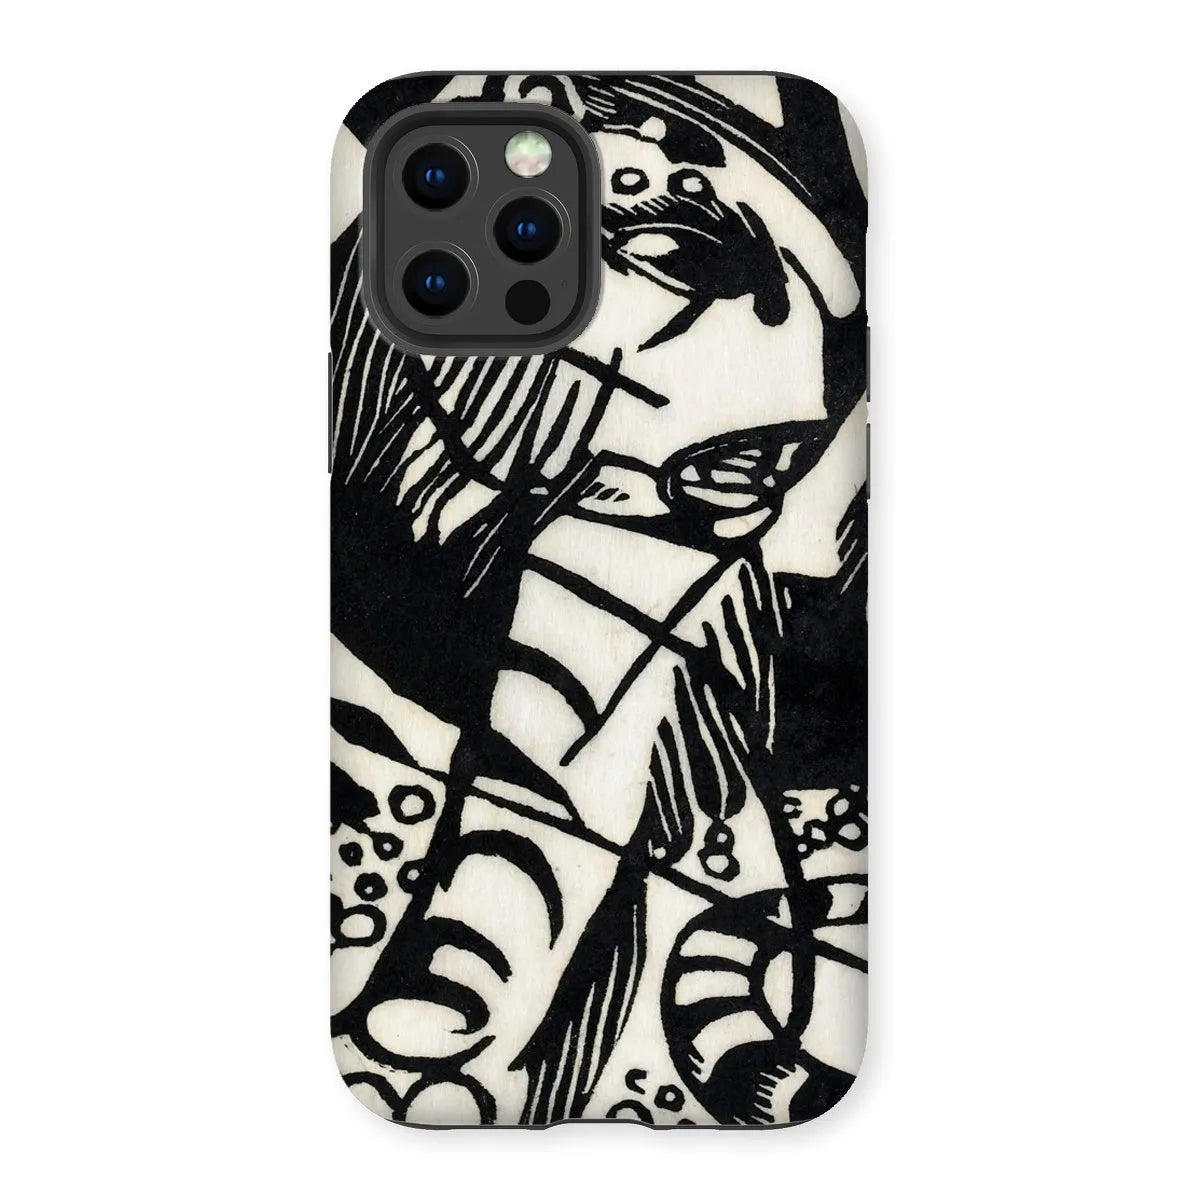 Tiger - Animal Aesthetic Phone Case - Franz Marc - Iphone 12 Pro / Matte - Mobile Phone Cases - Aesthetic Art